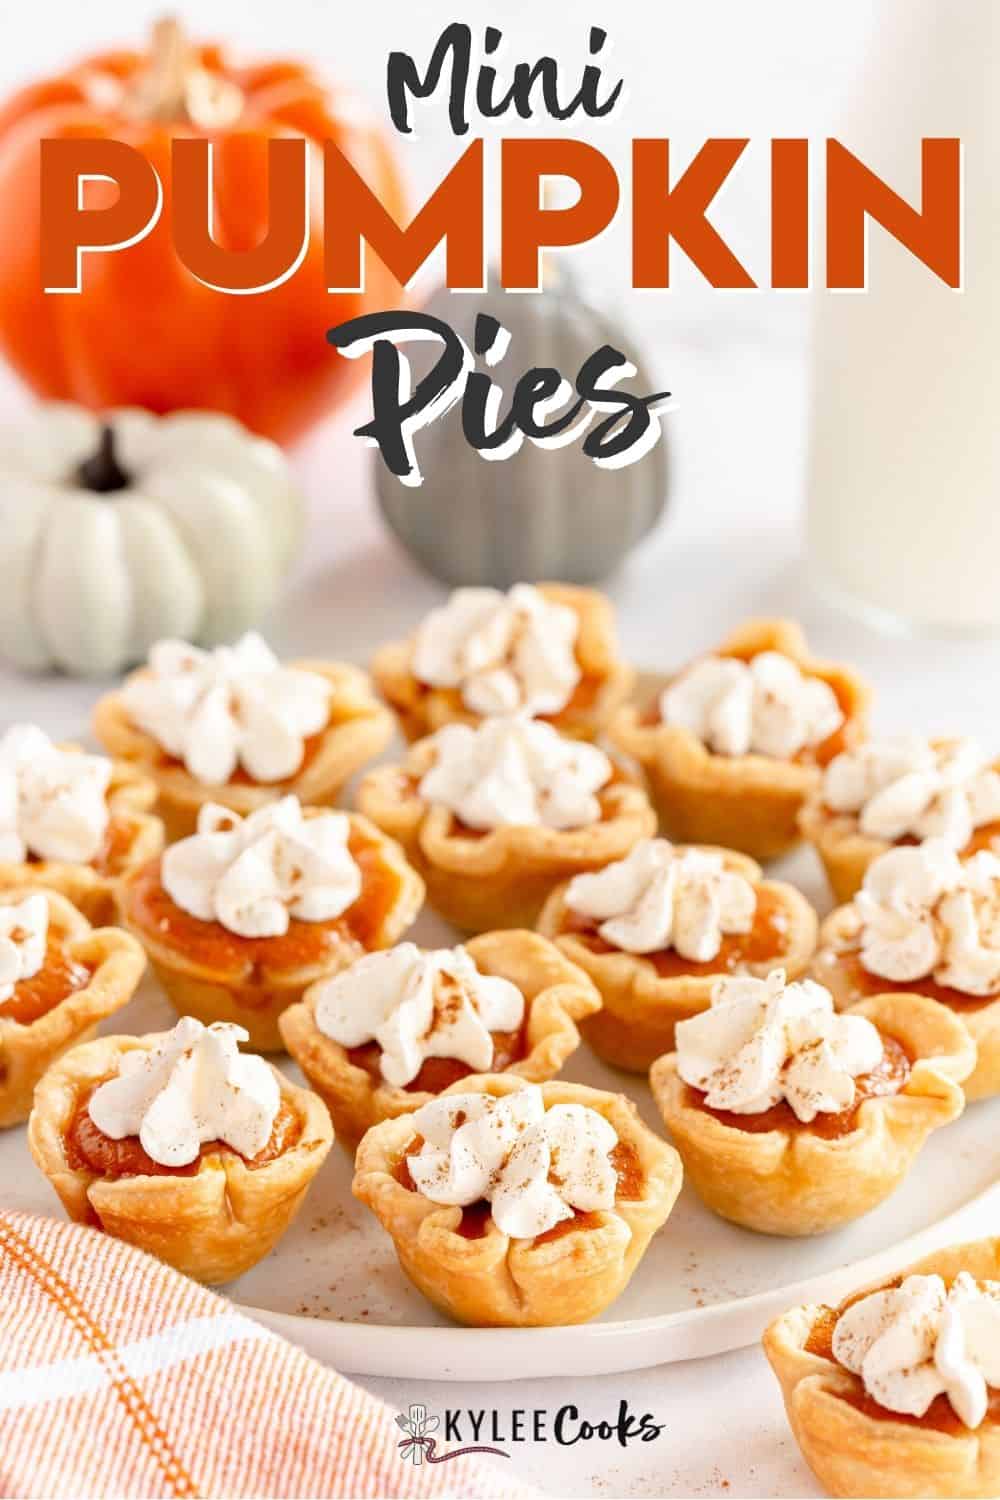 mini pumpkin pies with recipe title overlaid in text